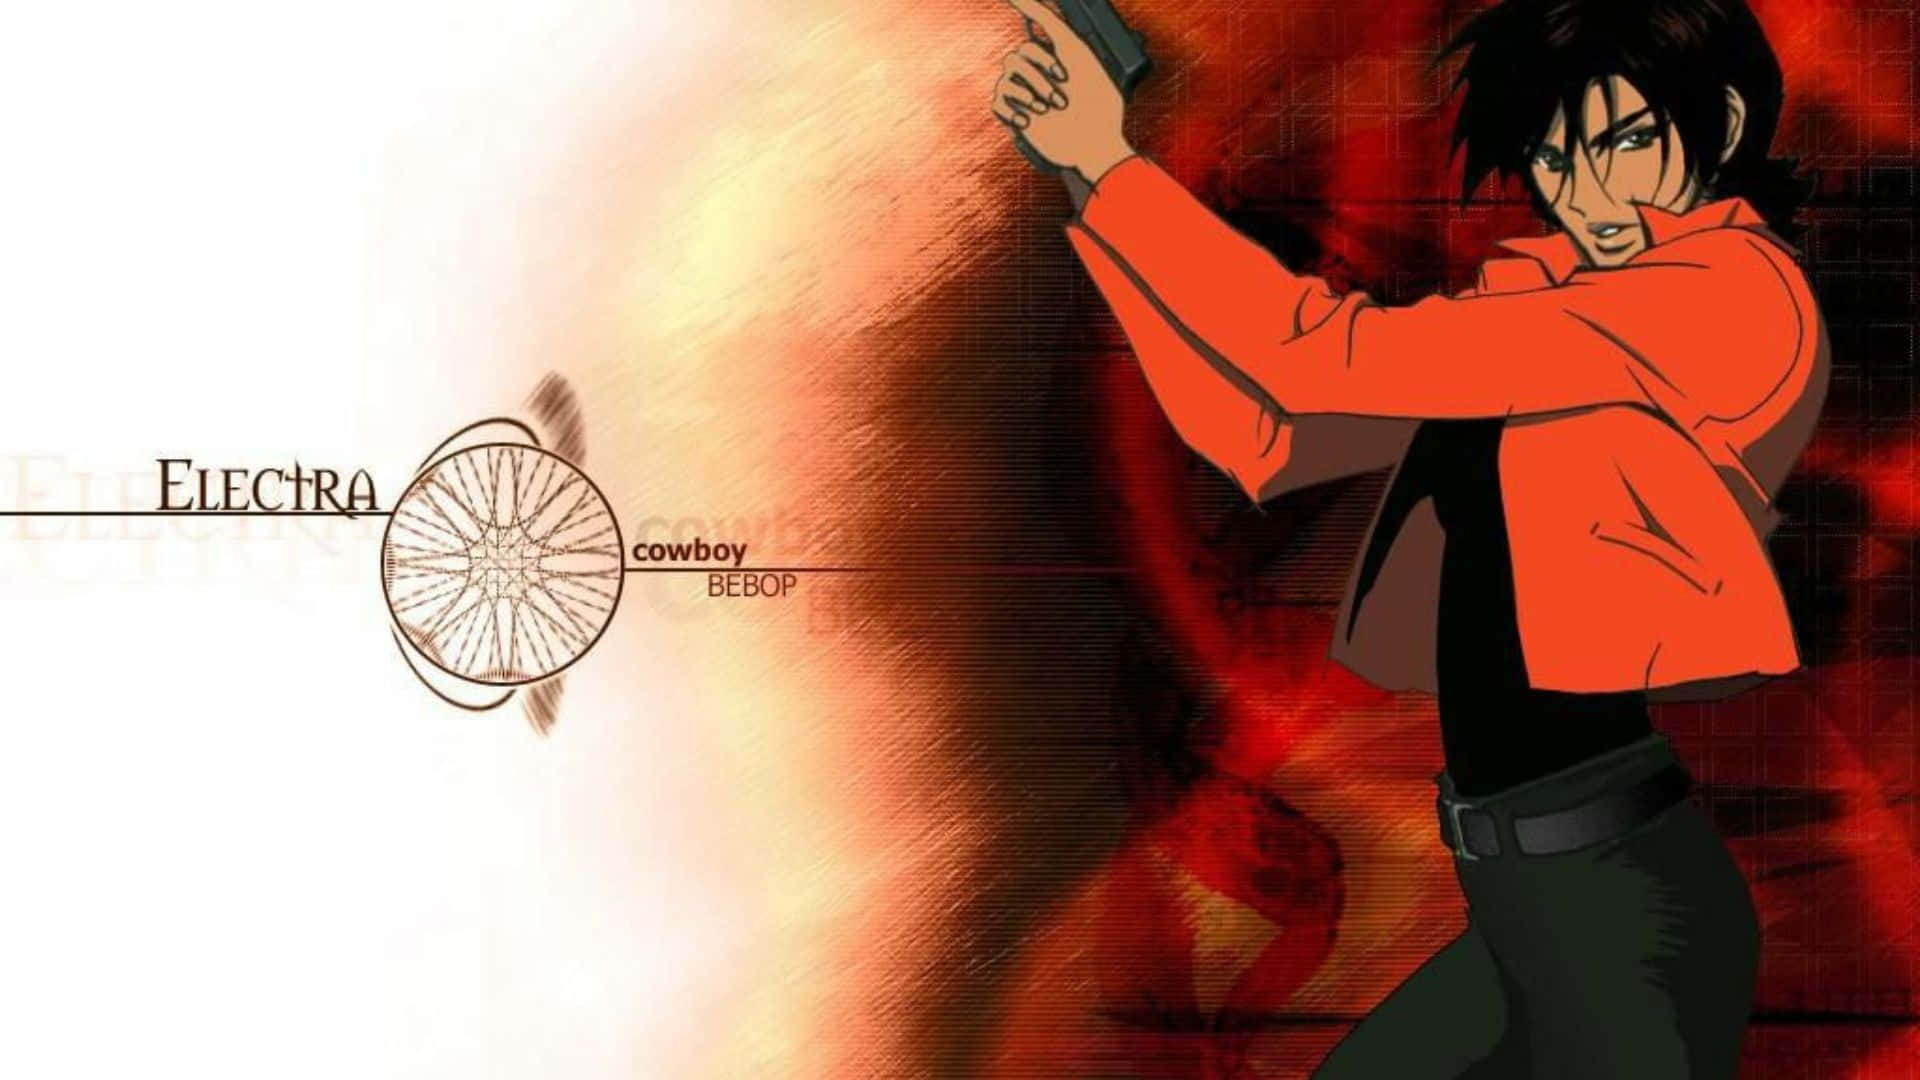 Electra Ovilo Standing Tall in Cowboy Bebop Anime Wallpaper